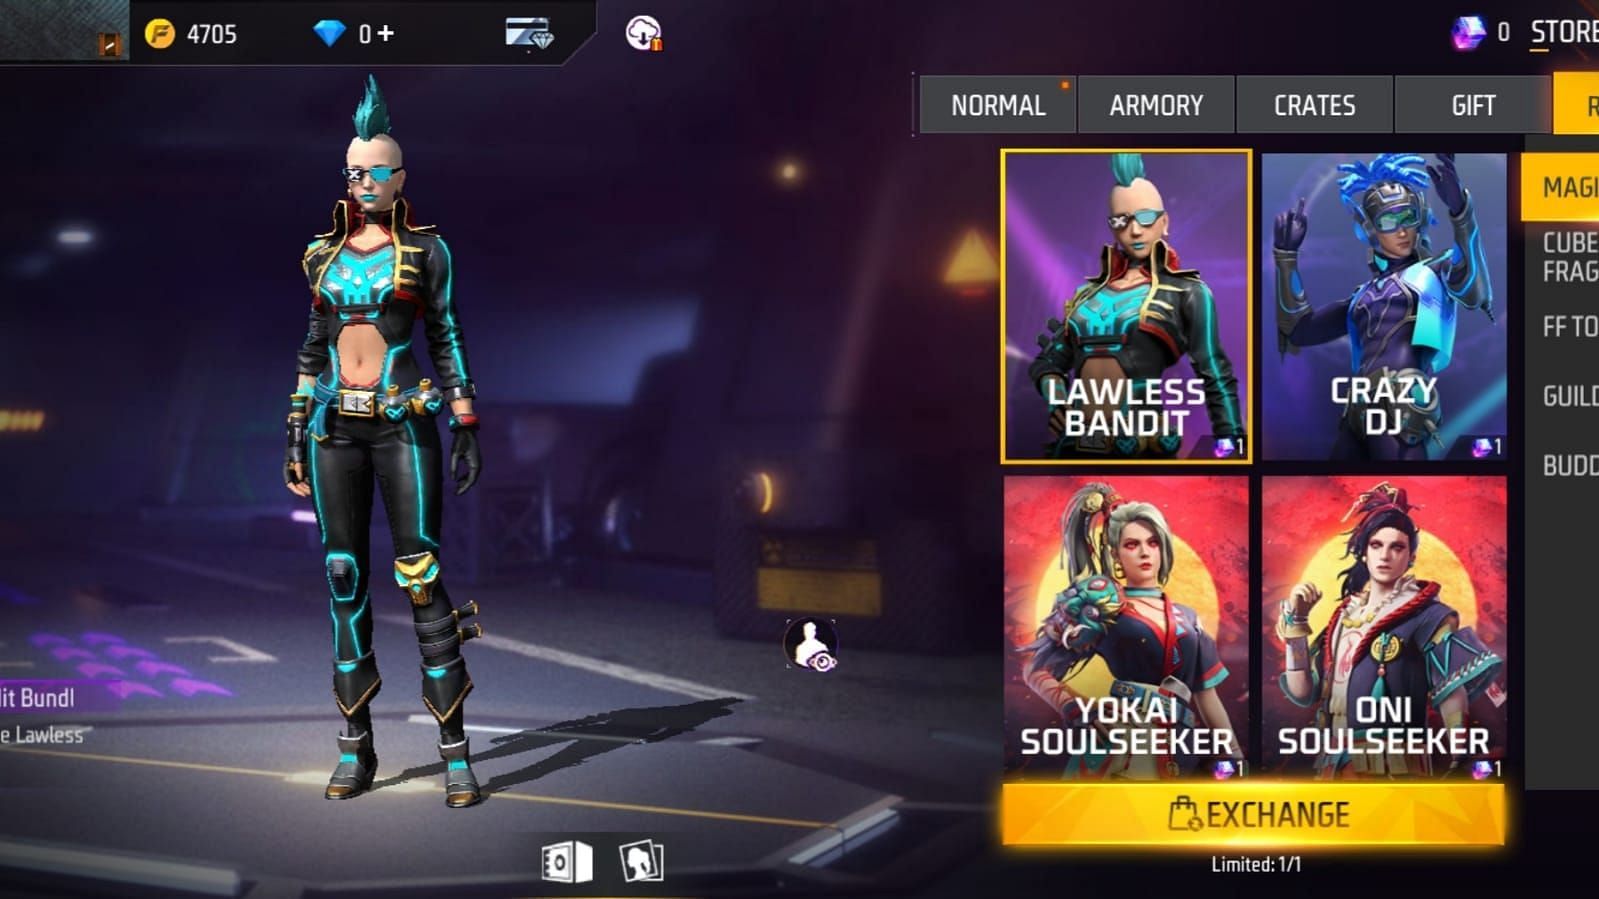 How to Get the Magic Cube in the Free Fire OB34 Update